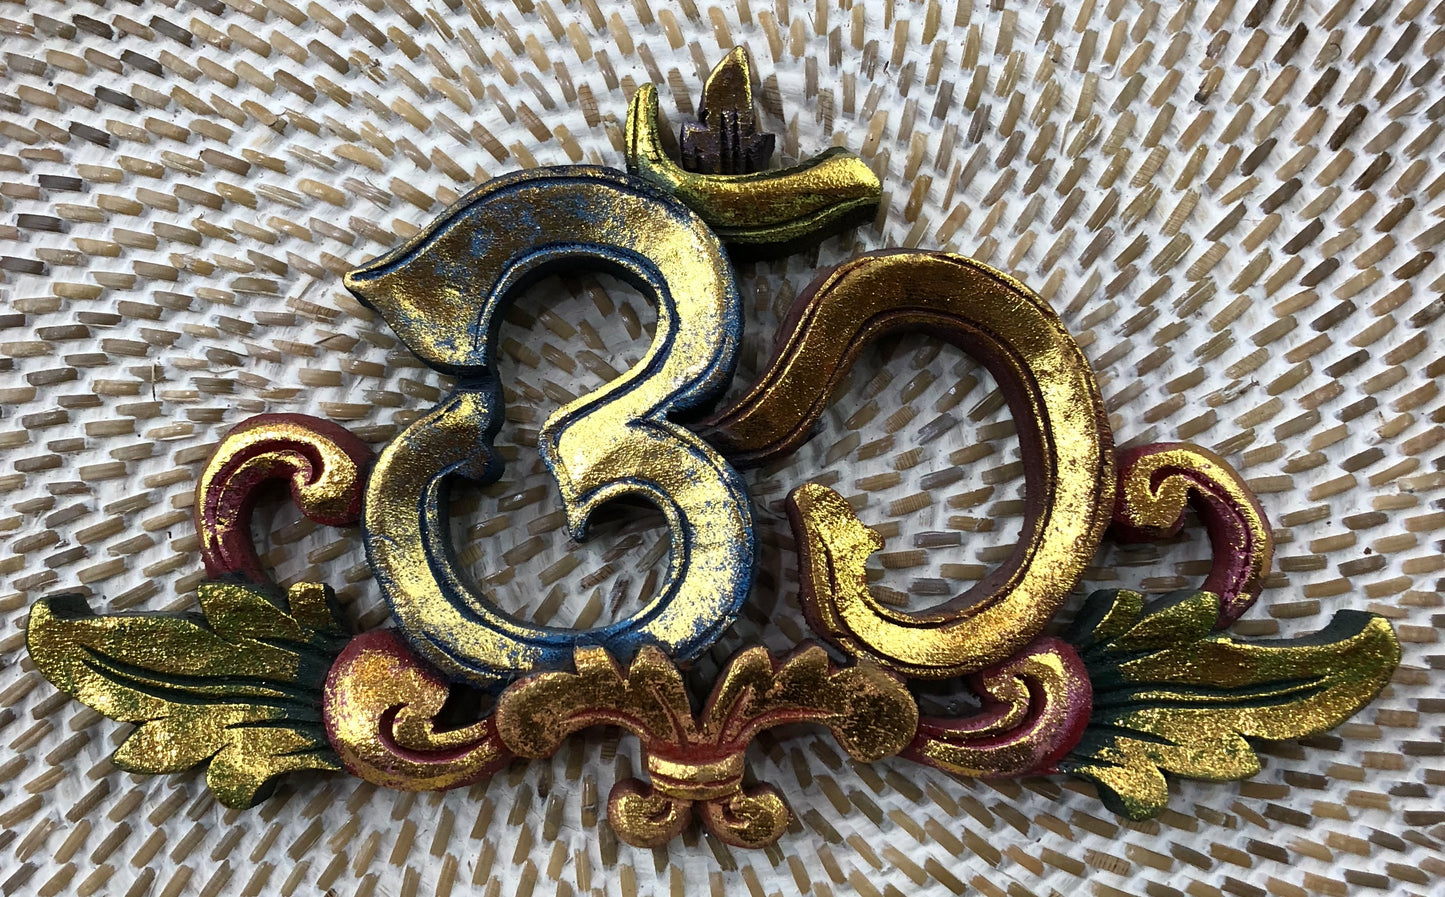 Balinese Om Hand Carved and Painted with Gold Leafing